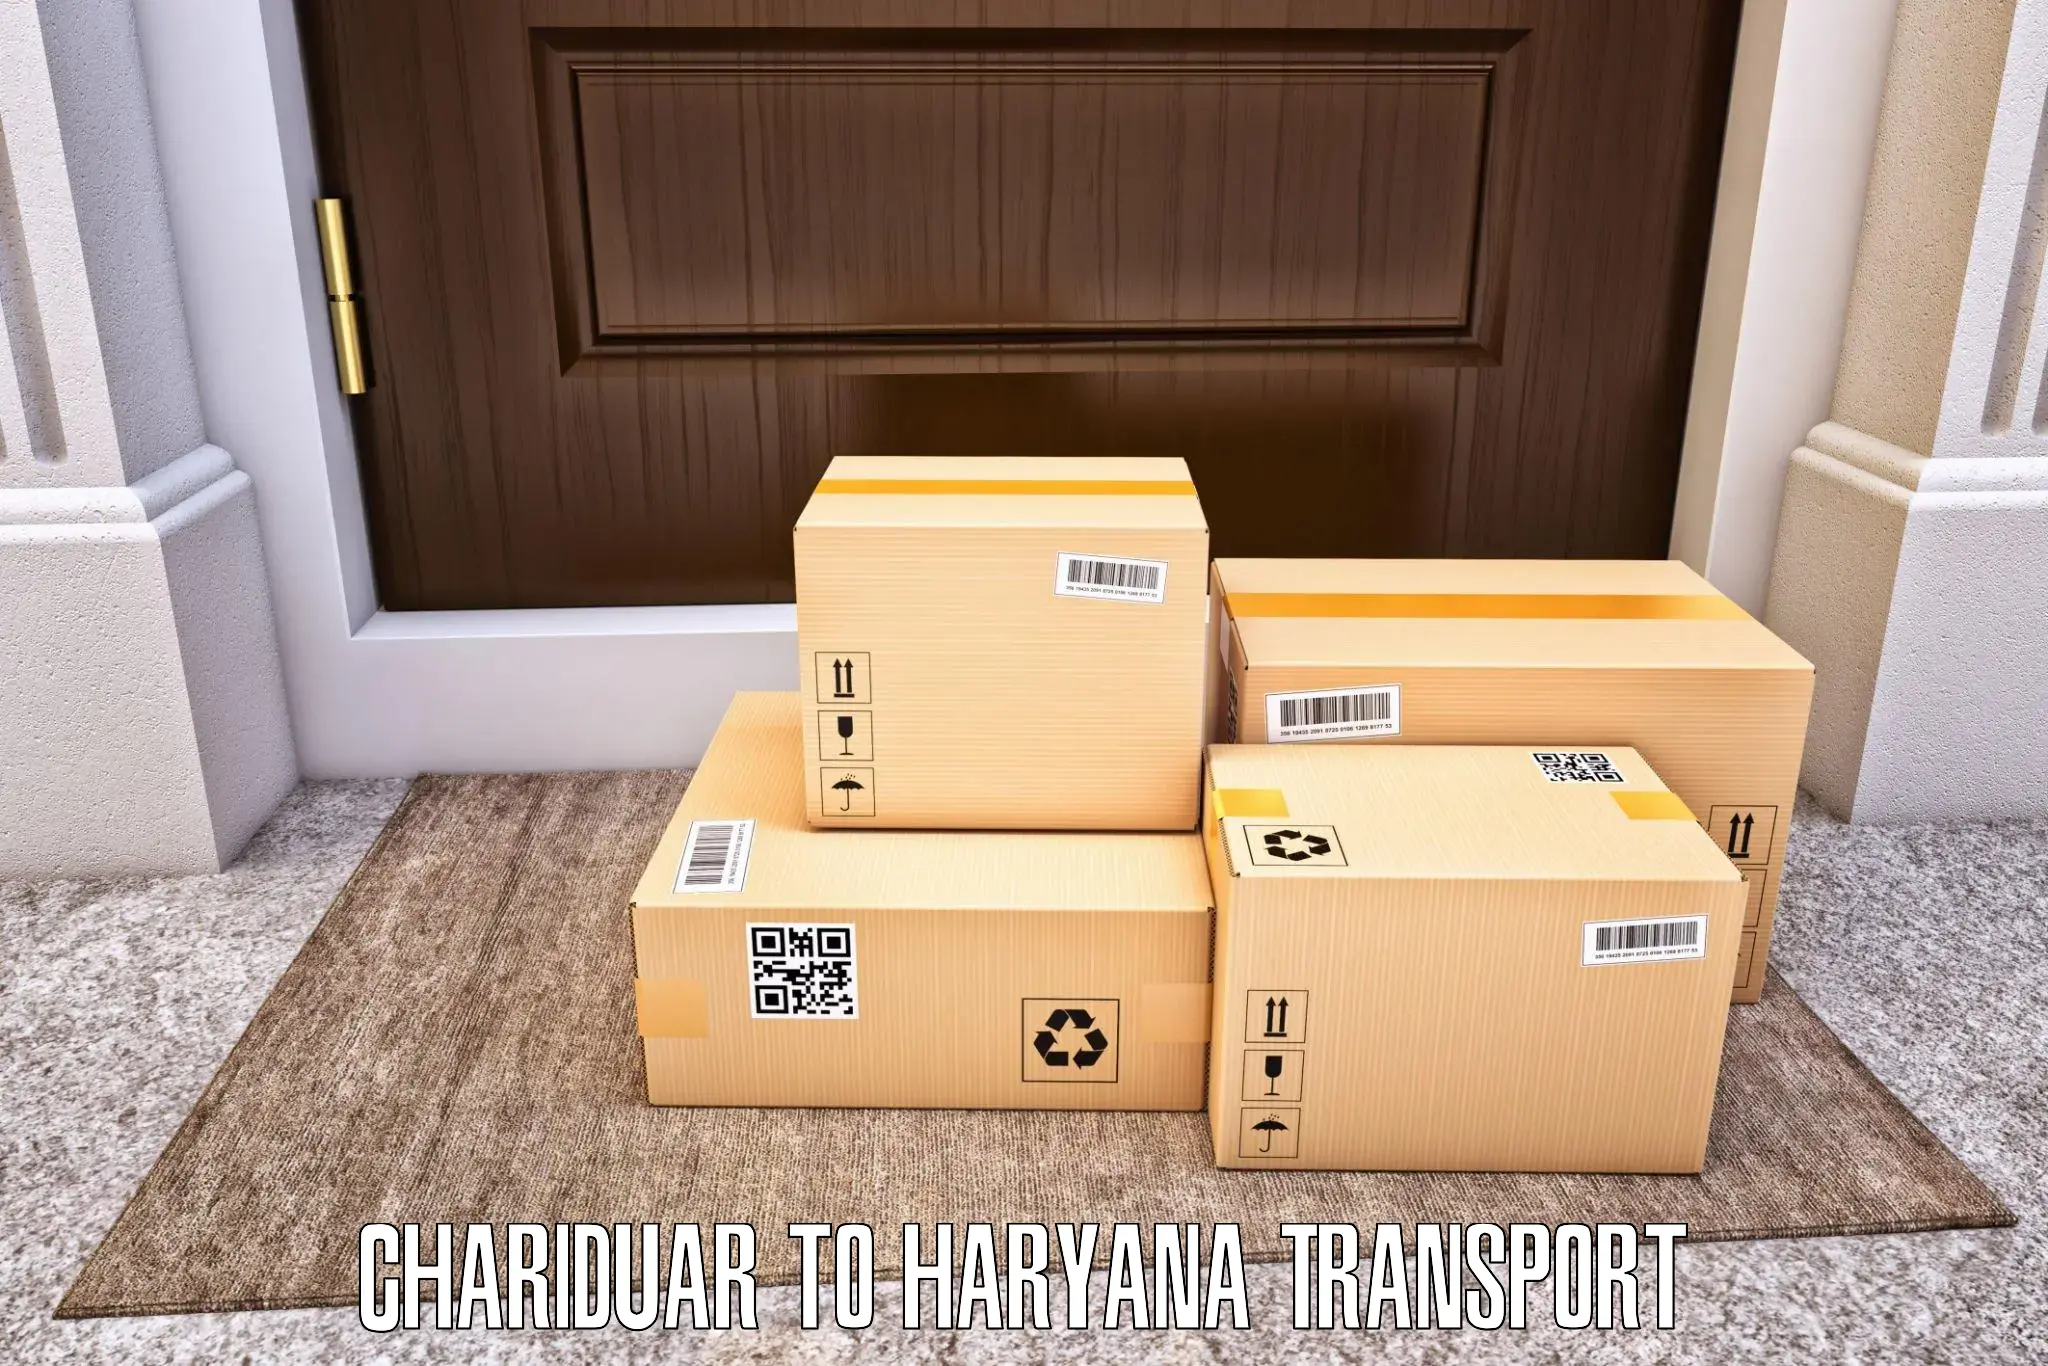 Nearby transport service Chariduar to Palwal